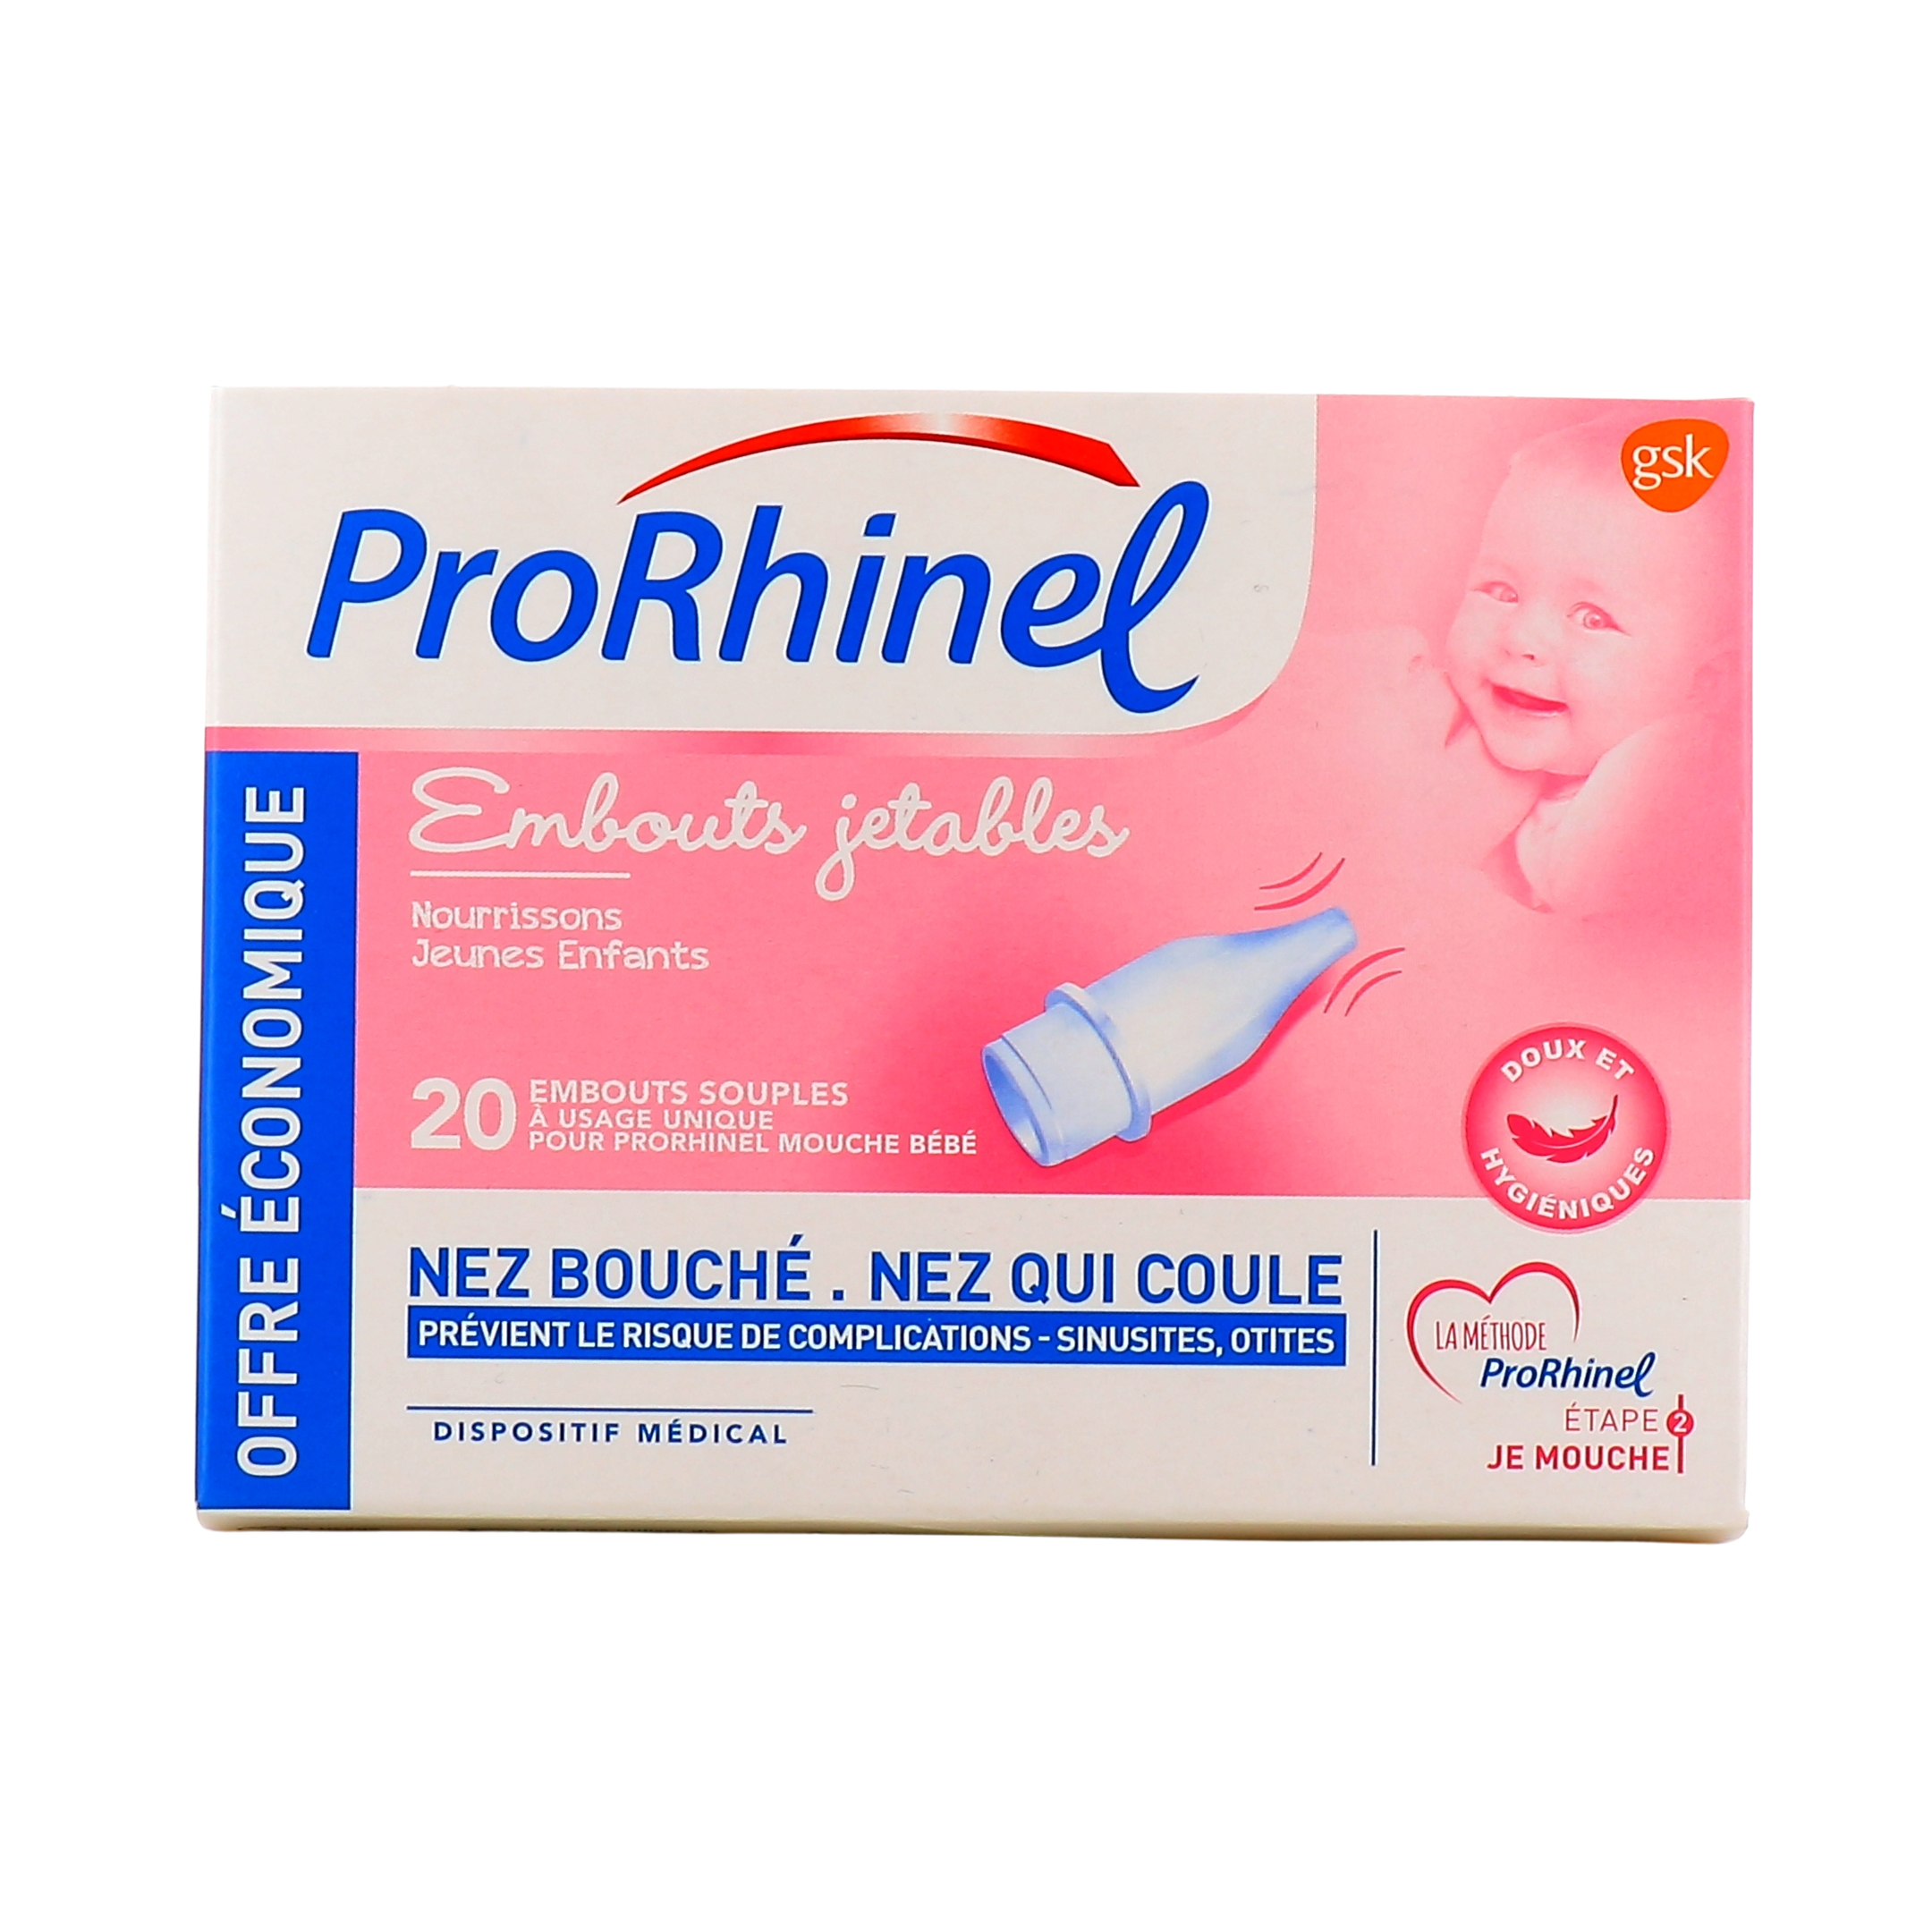 ProRhinel 10 Embouts jetables - Prorhinel